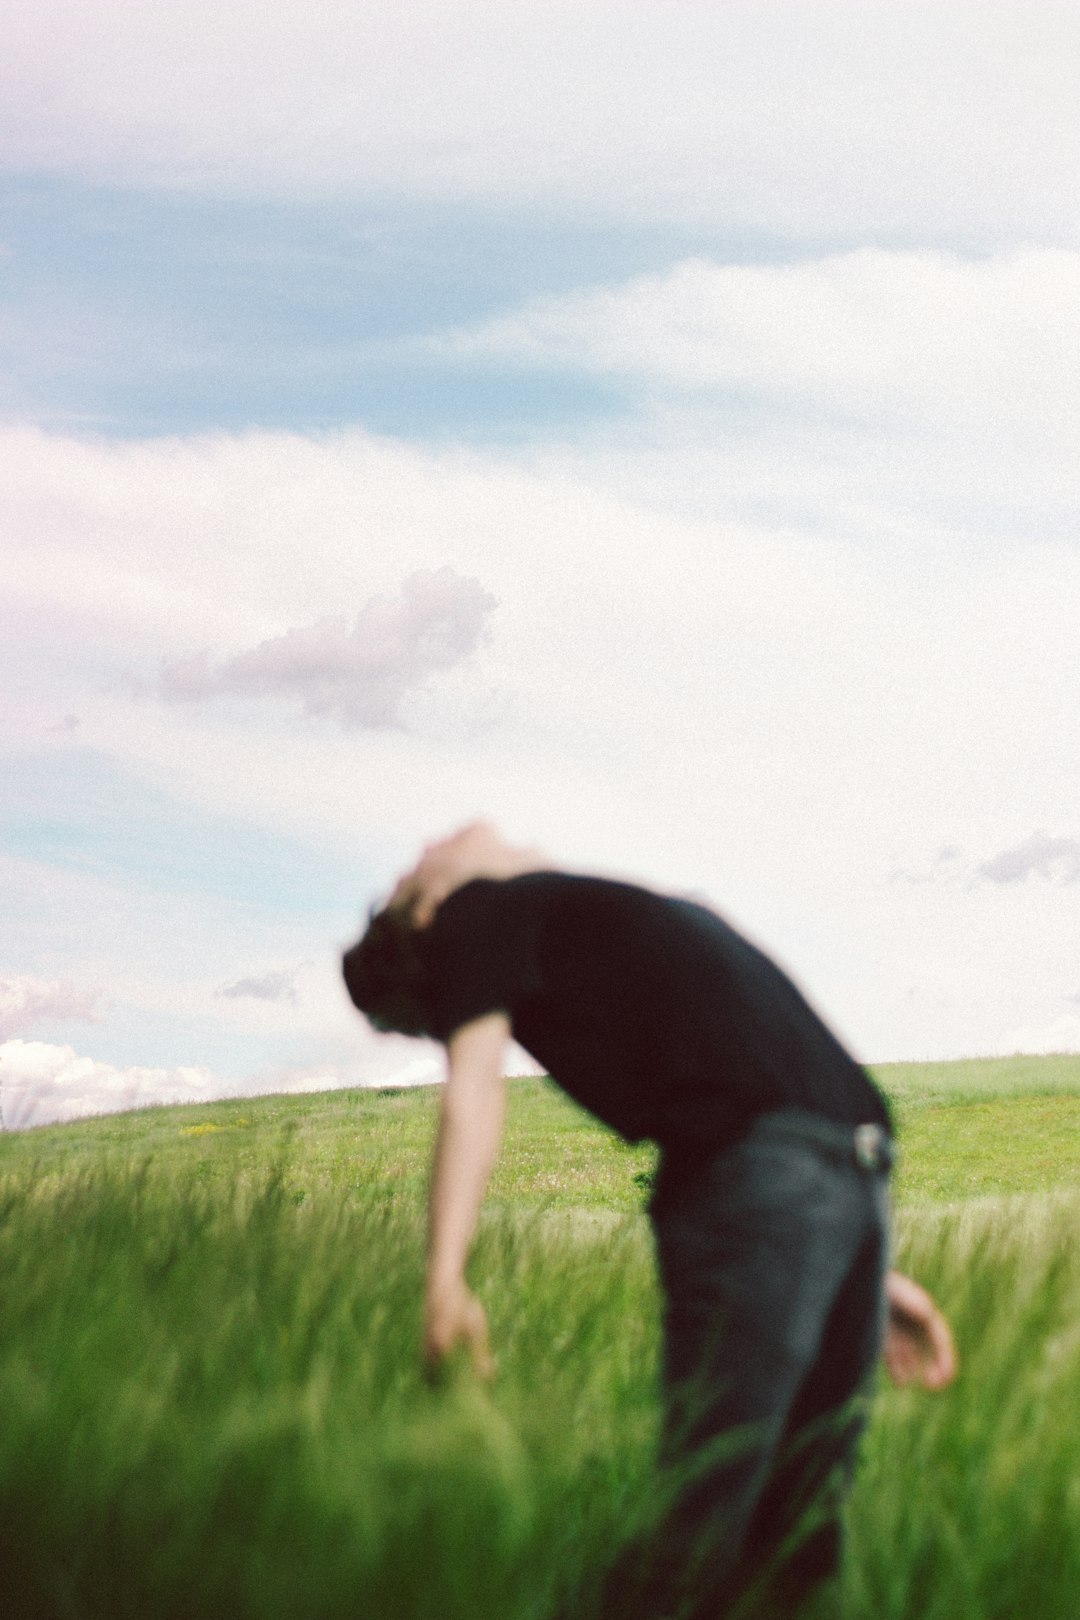 man in black t-shirt and gray denim jeans standing on green grass field during daytime